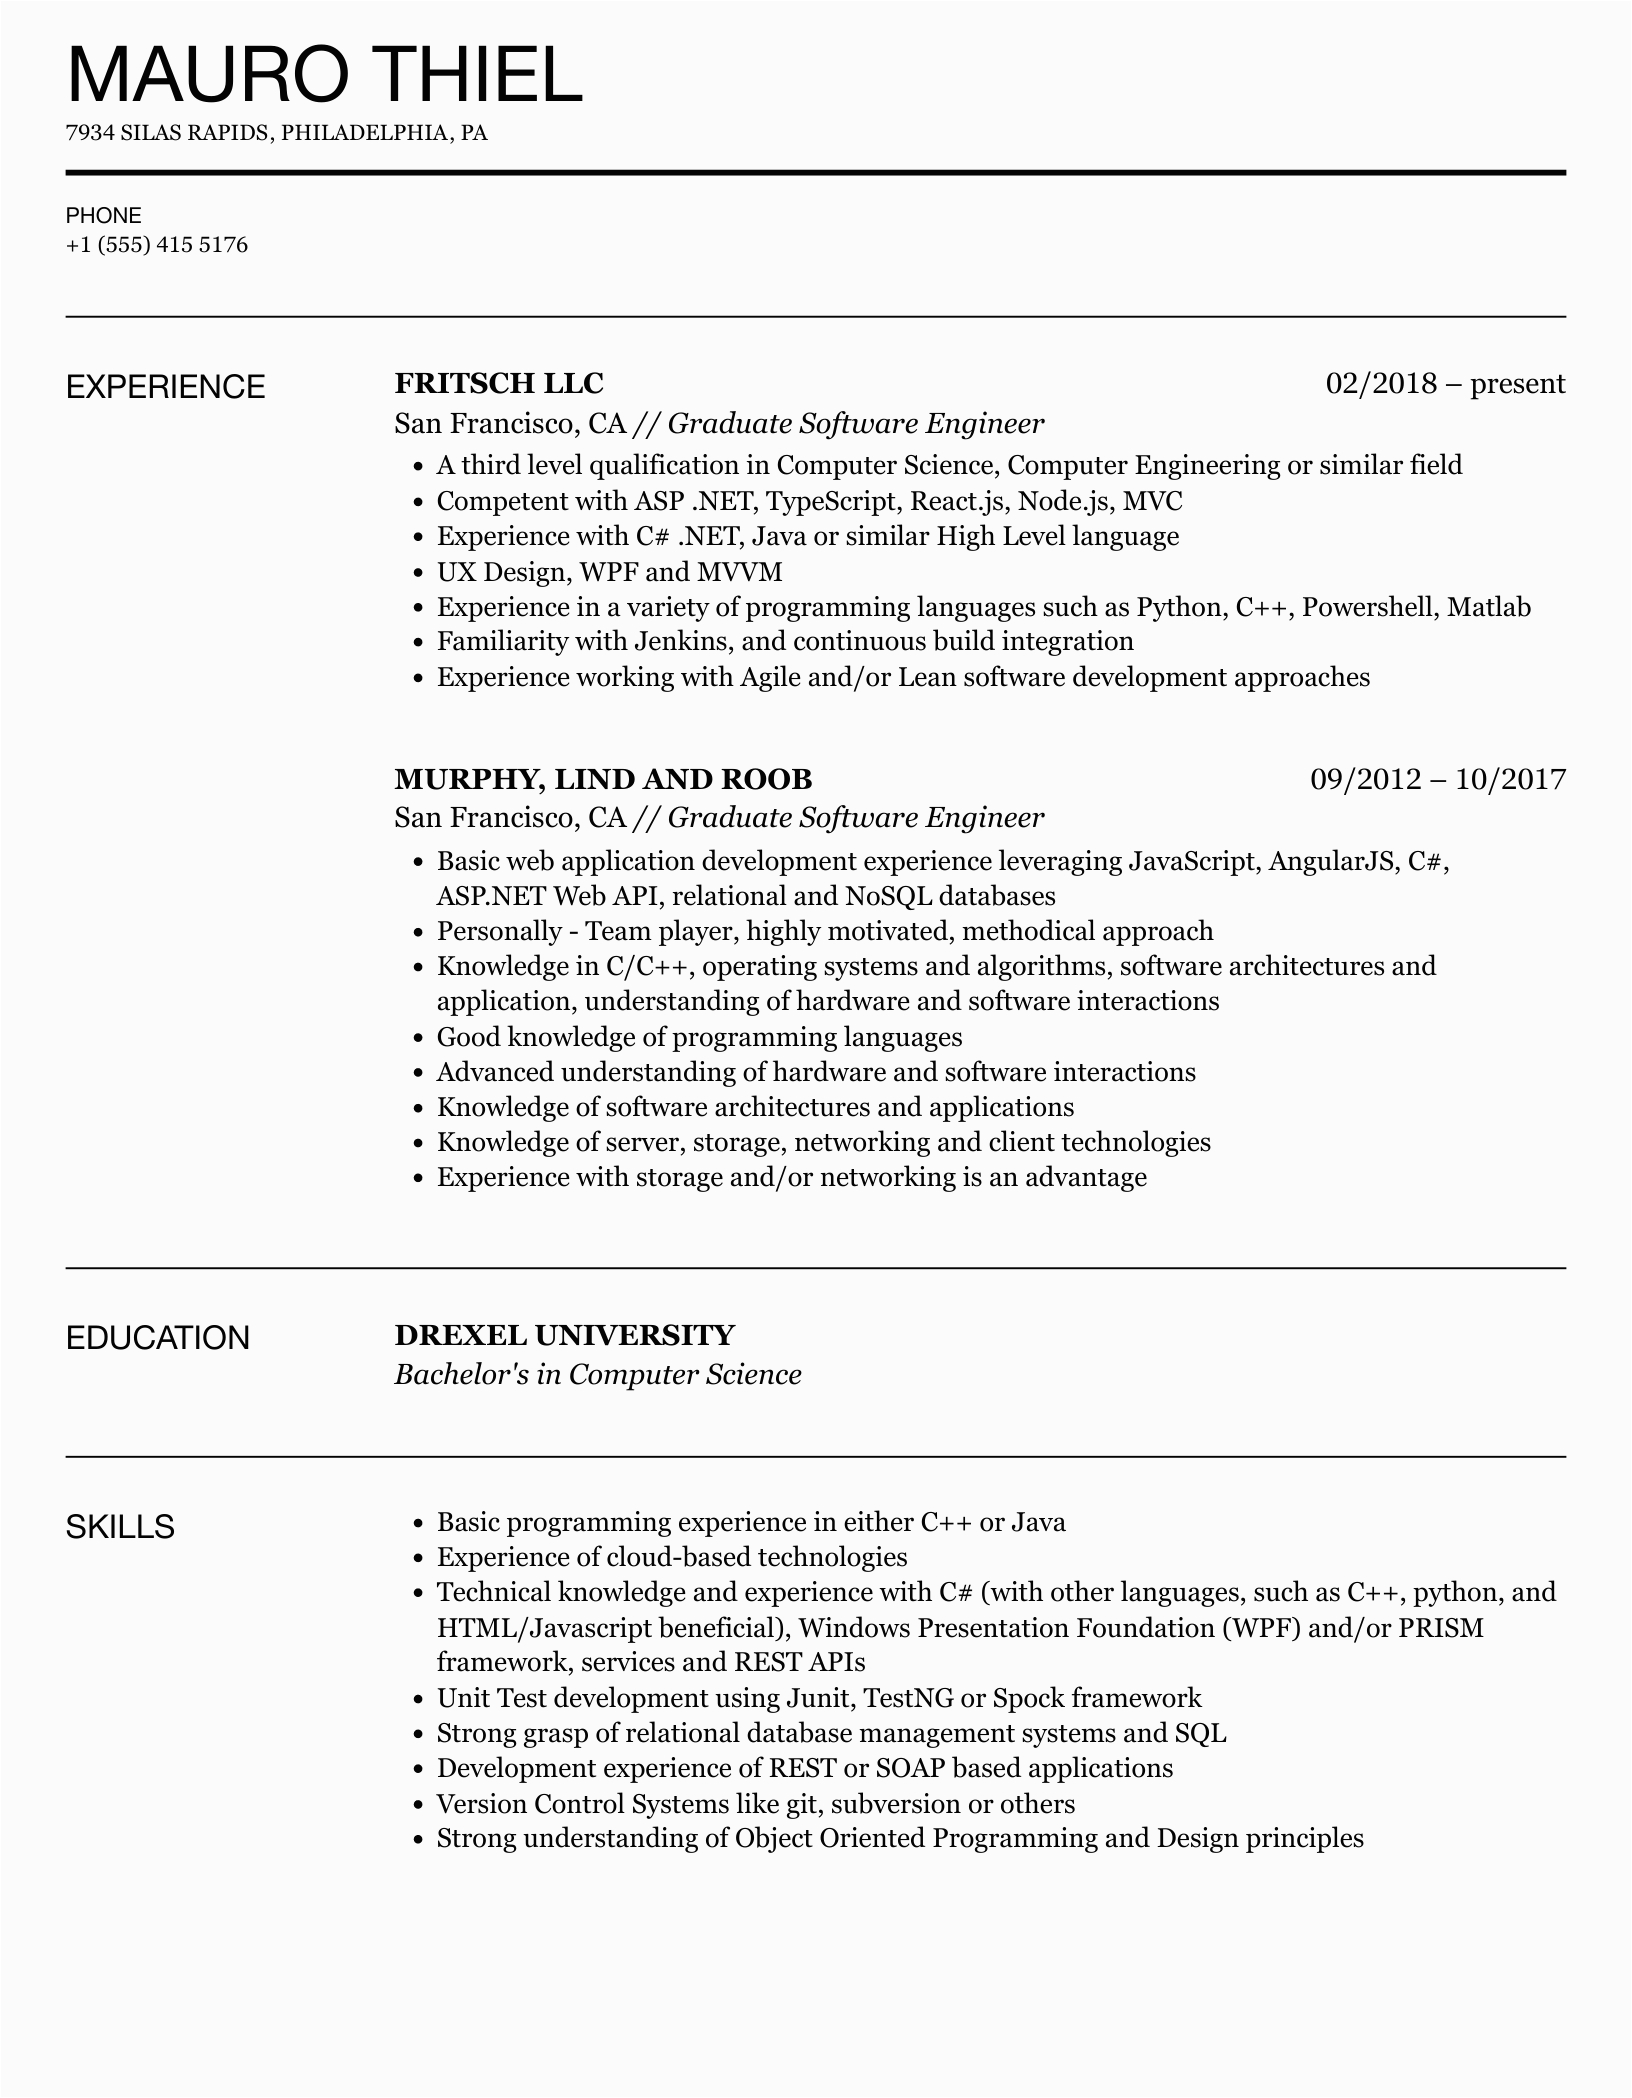 Sample Resume for Phd software Engineer Graduate software Engineer Resume Samples